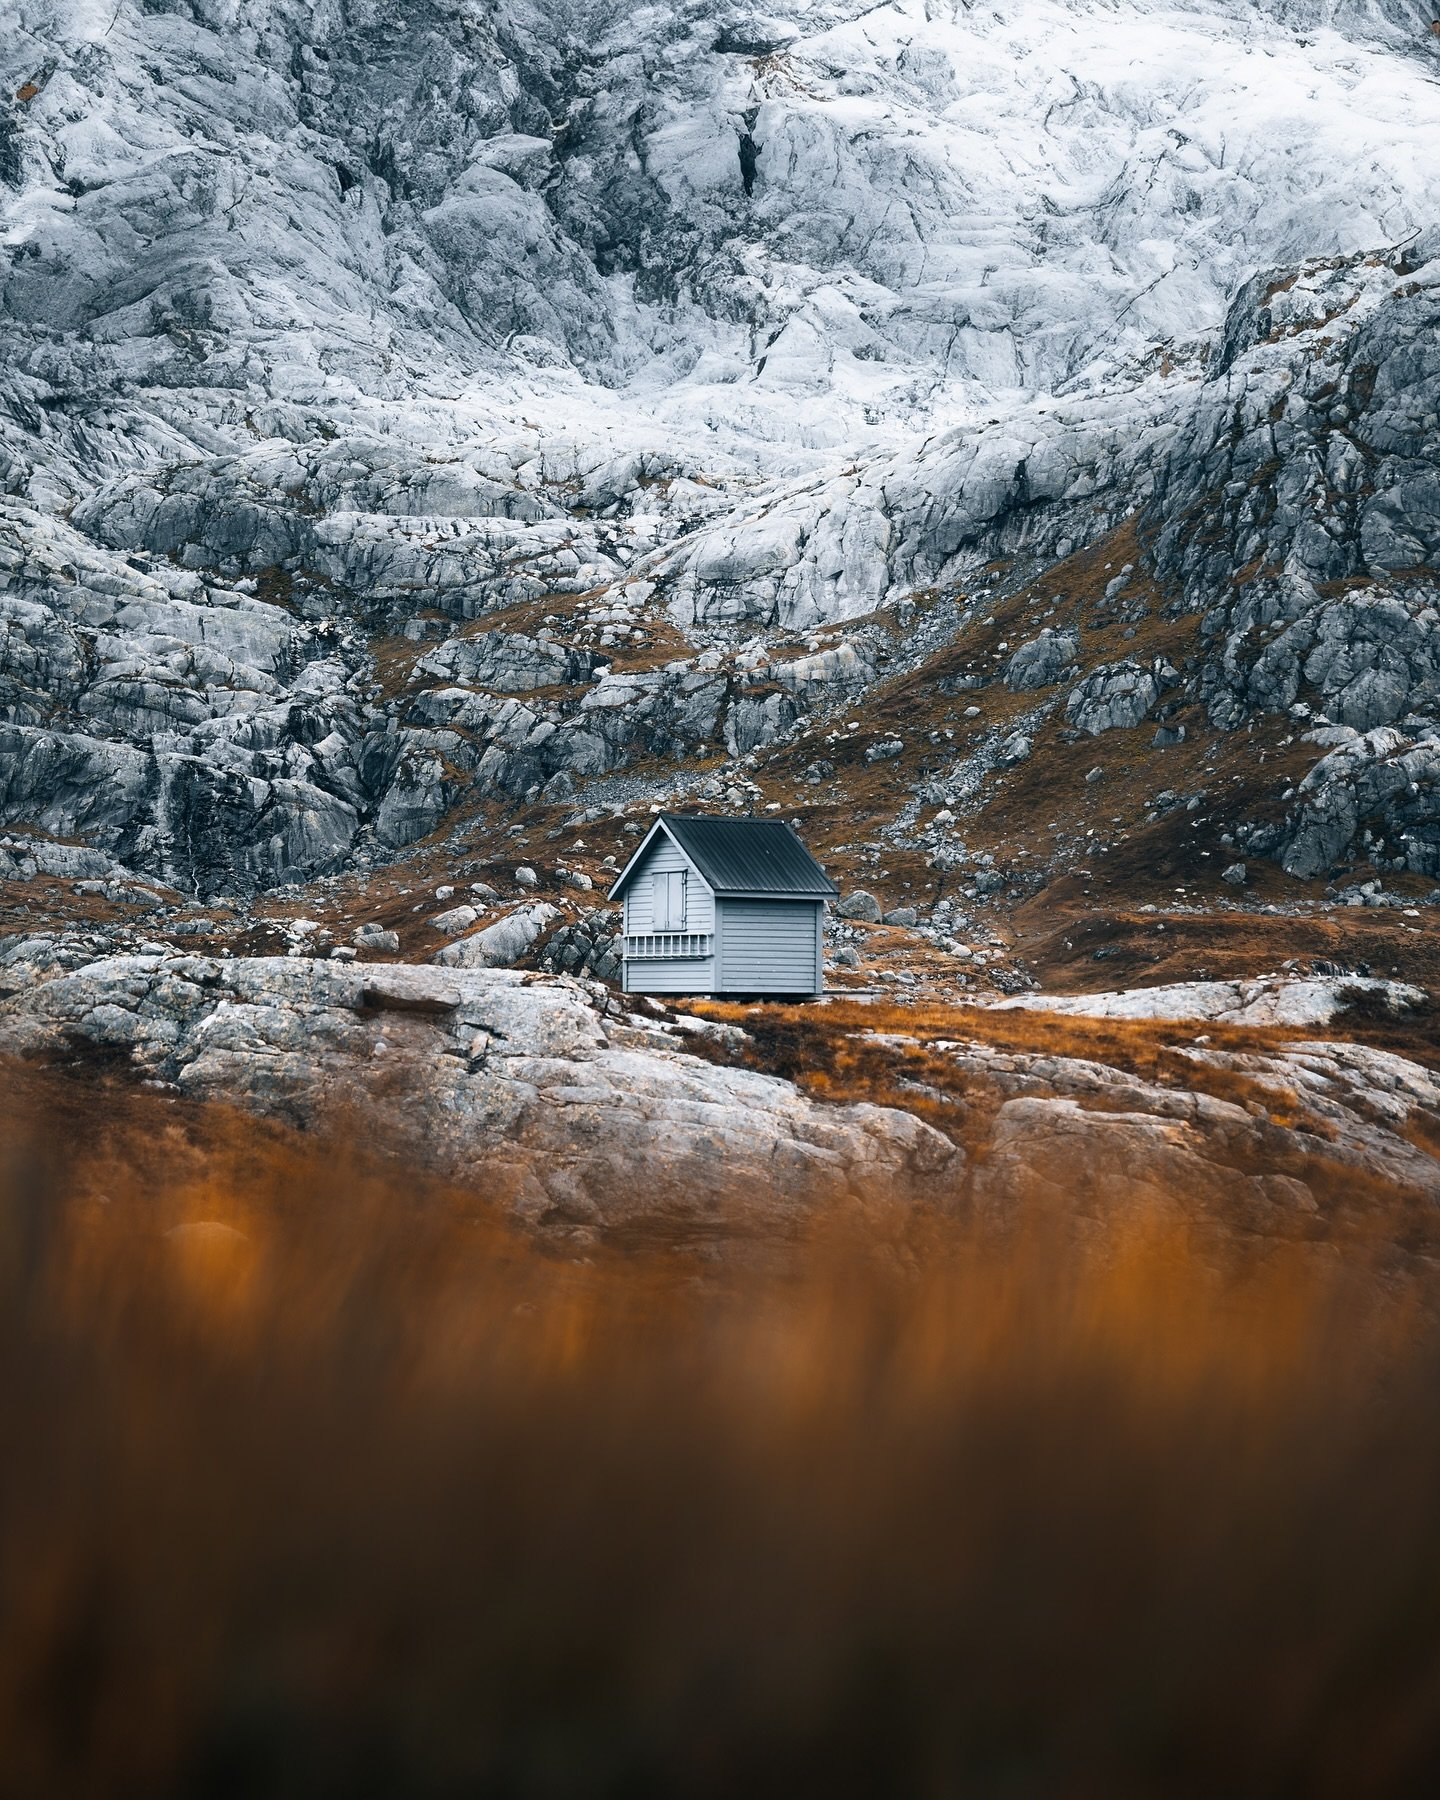 Isolated. 4 hours away from civilization.
.
📸: @sean_cgn 
📍: Norway
.
#visitnorway #norges_fotografer #norge